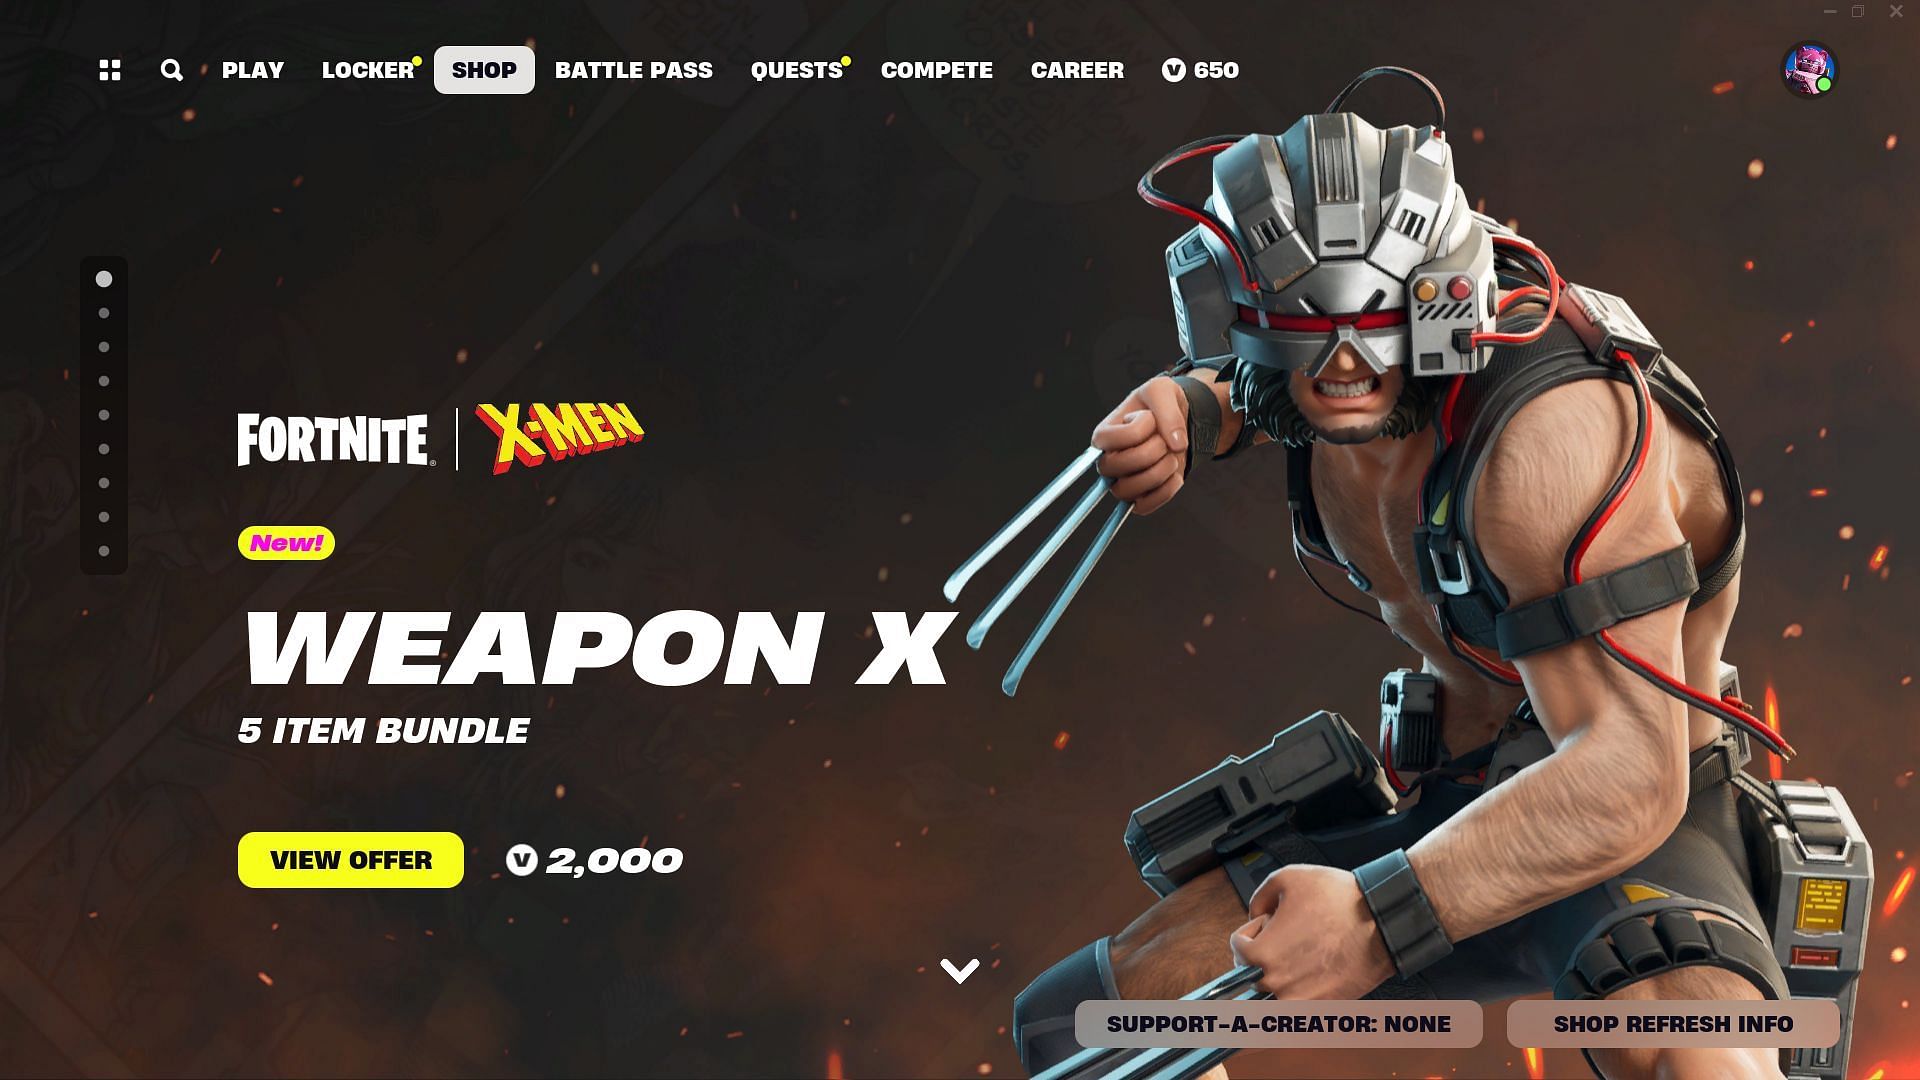 You can now purchase the Weapon X (Wolverine) skin in Fortnite (Image via Epic Games)